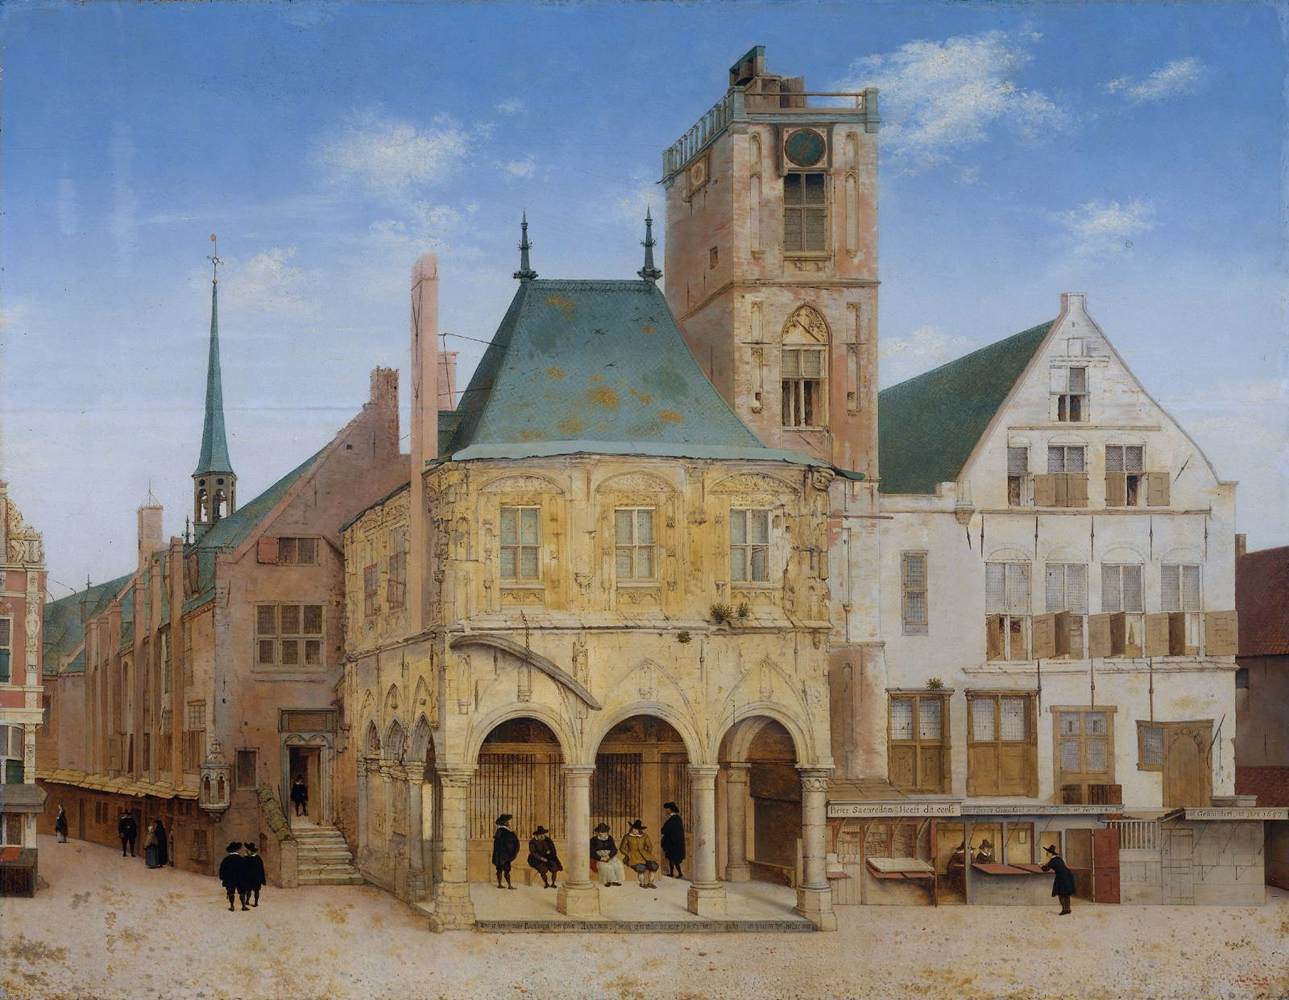 The Old City Hall of Amsterdam